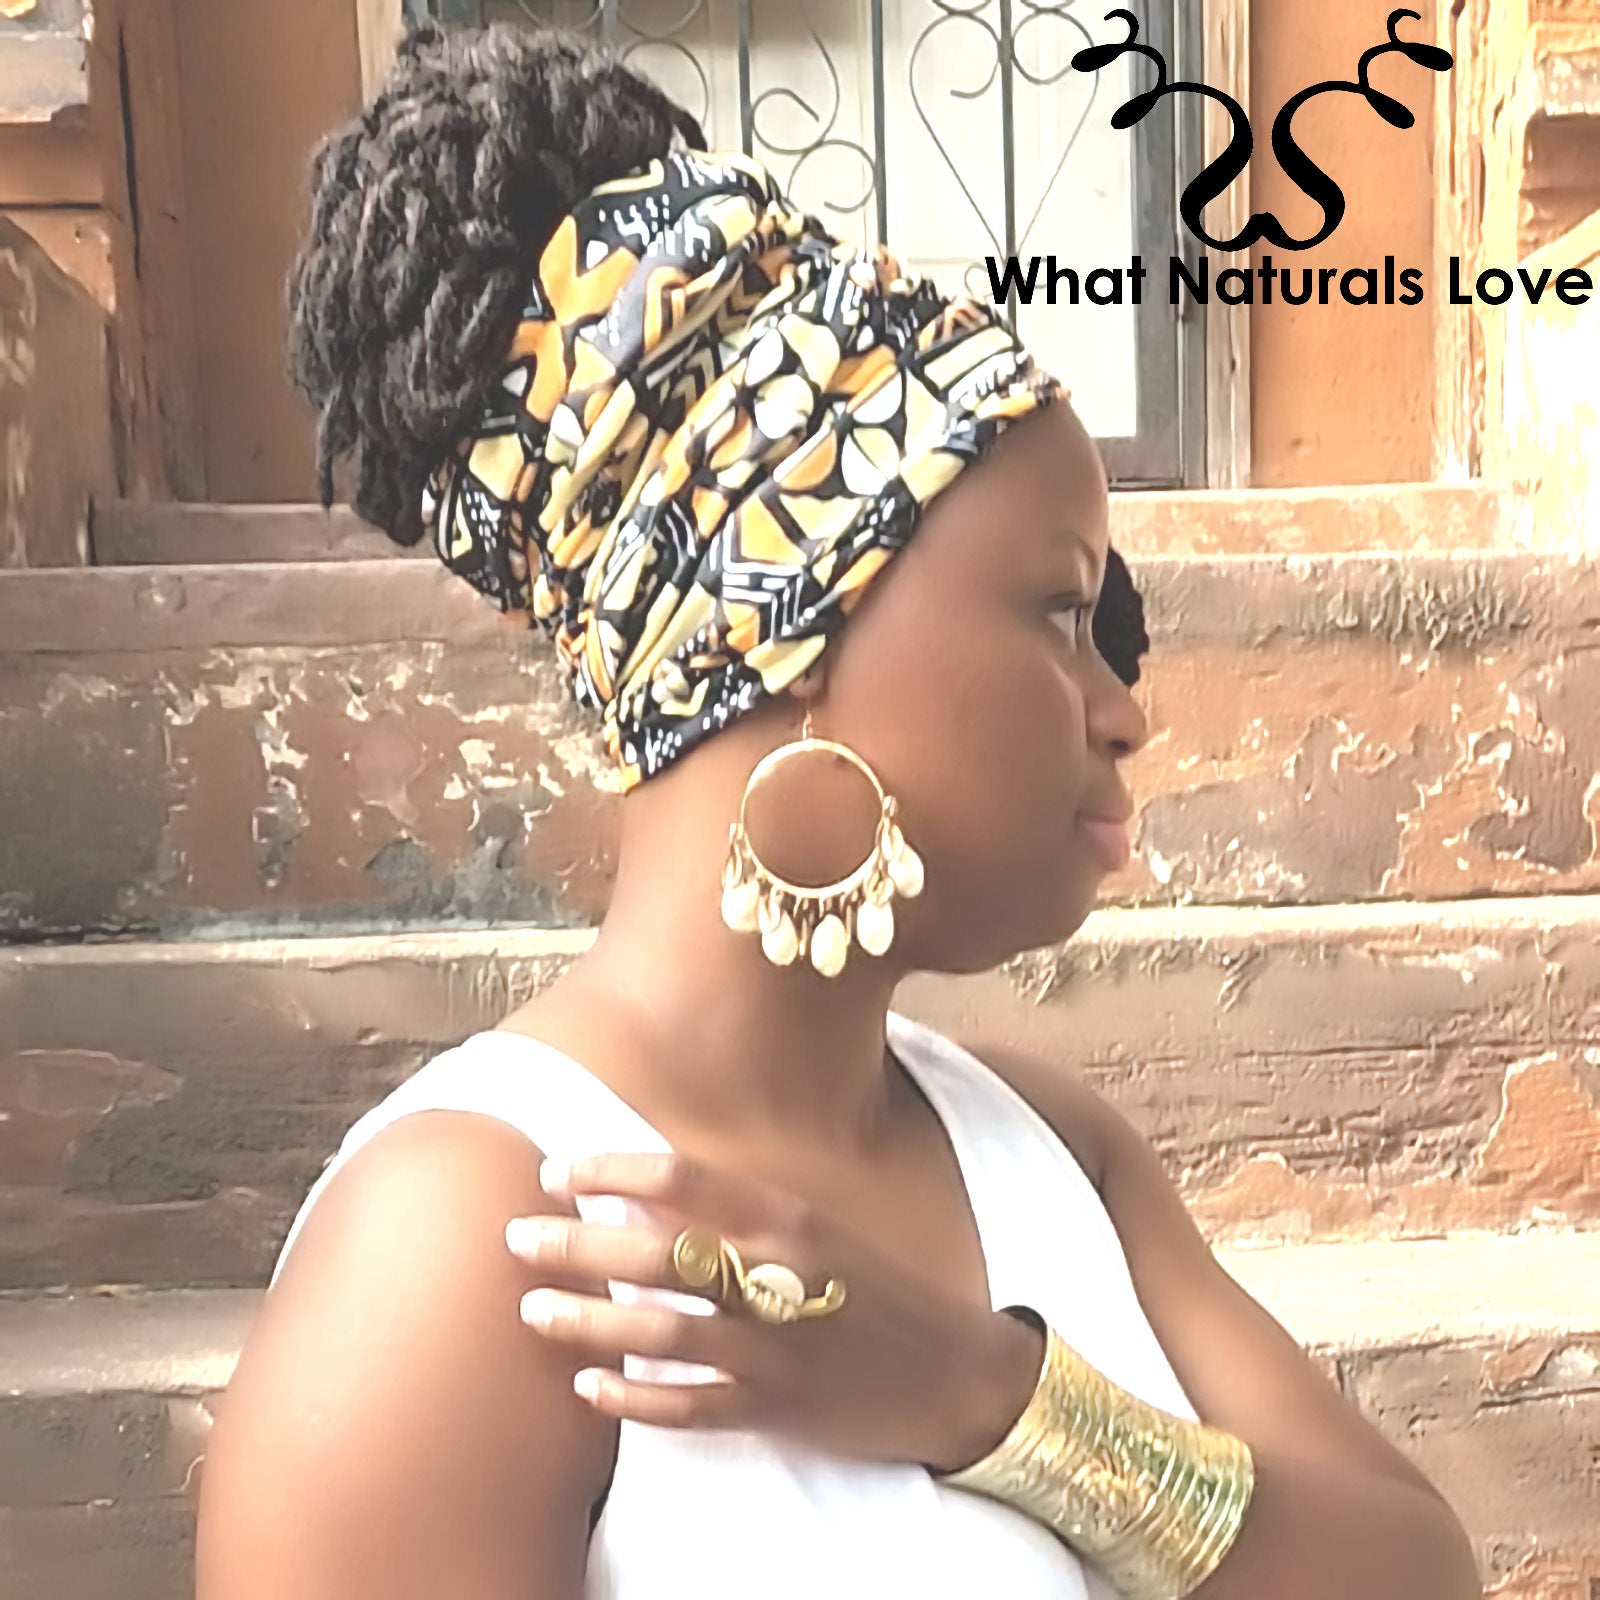 Long Tail Tube Wrap to style and protect Locs, Sisterlocks and Dreadlocks Perfect for Mother&